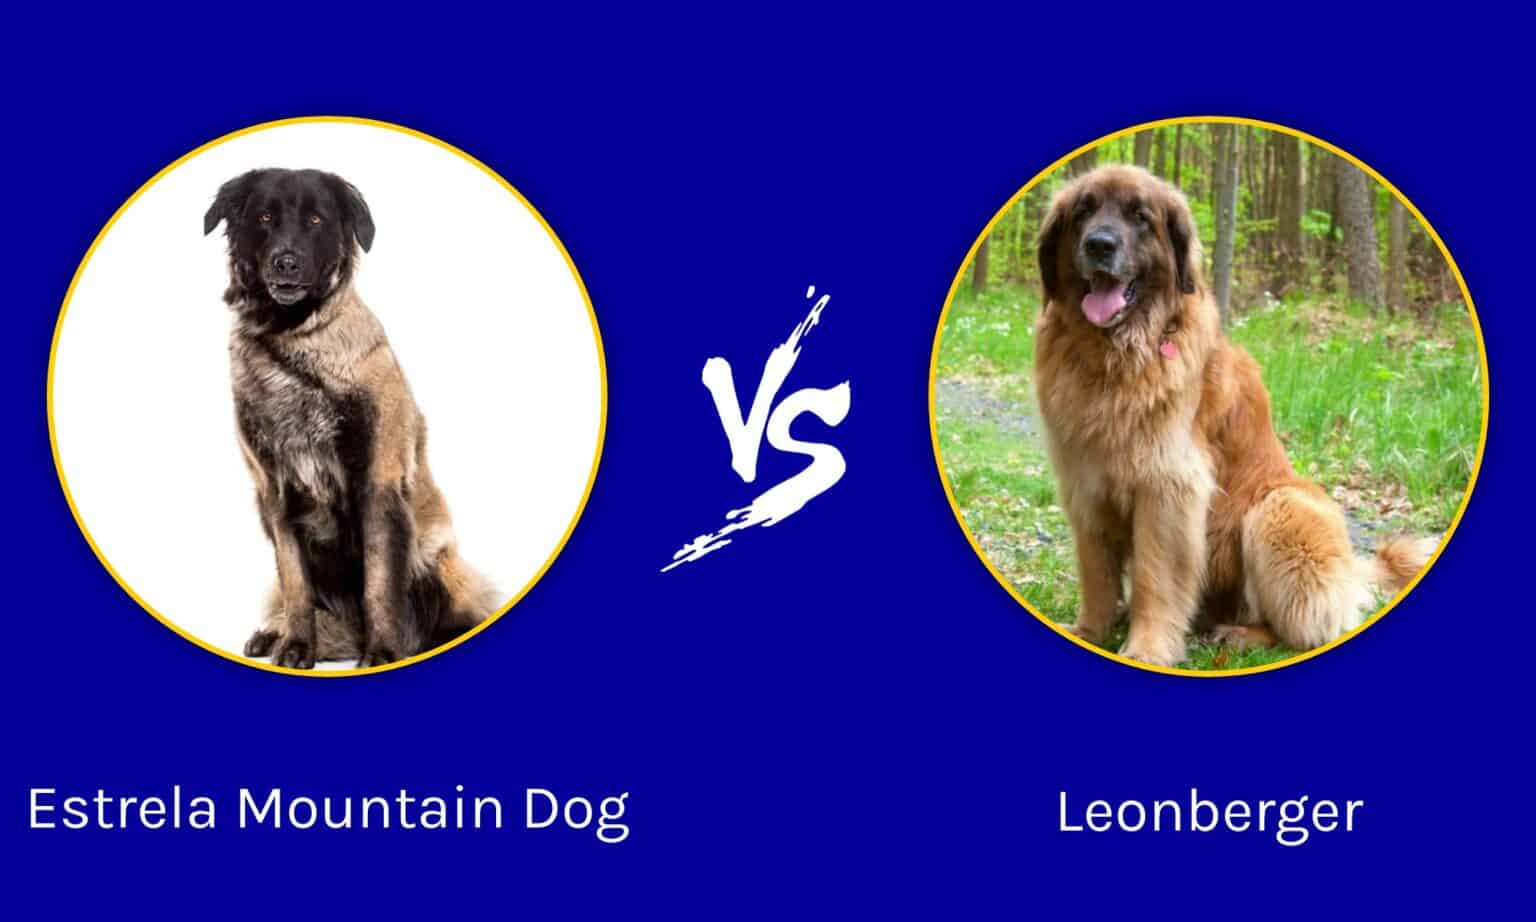 Estrela Mountain Dog vs Leonberger: What’s the difference? - Unianimal